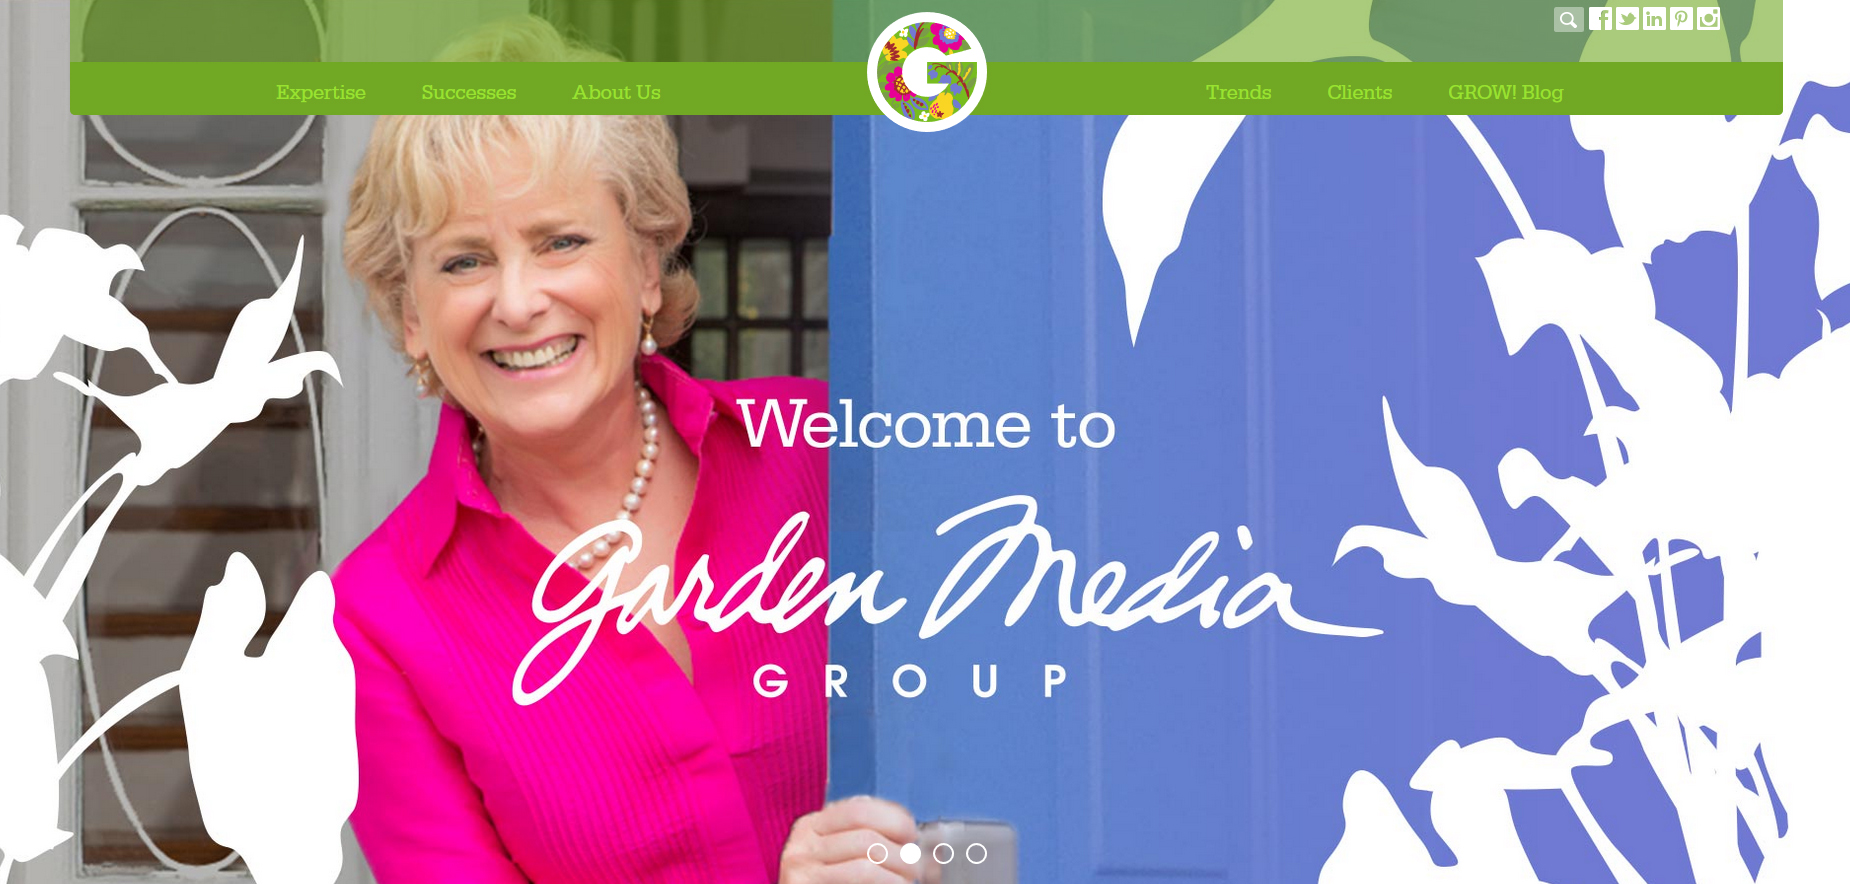 Garden Media has received numerous awards, including a 2017 Media Award from GWA for the redesign of its website, a 2018 40 Under 40 Award for Katie Dubow and a Top 50 Women-Owned Business in 2016